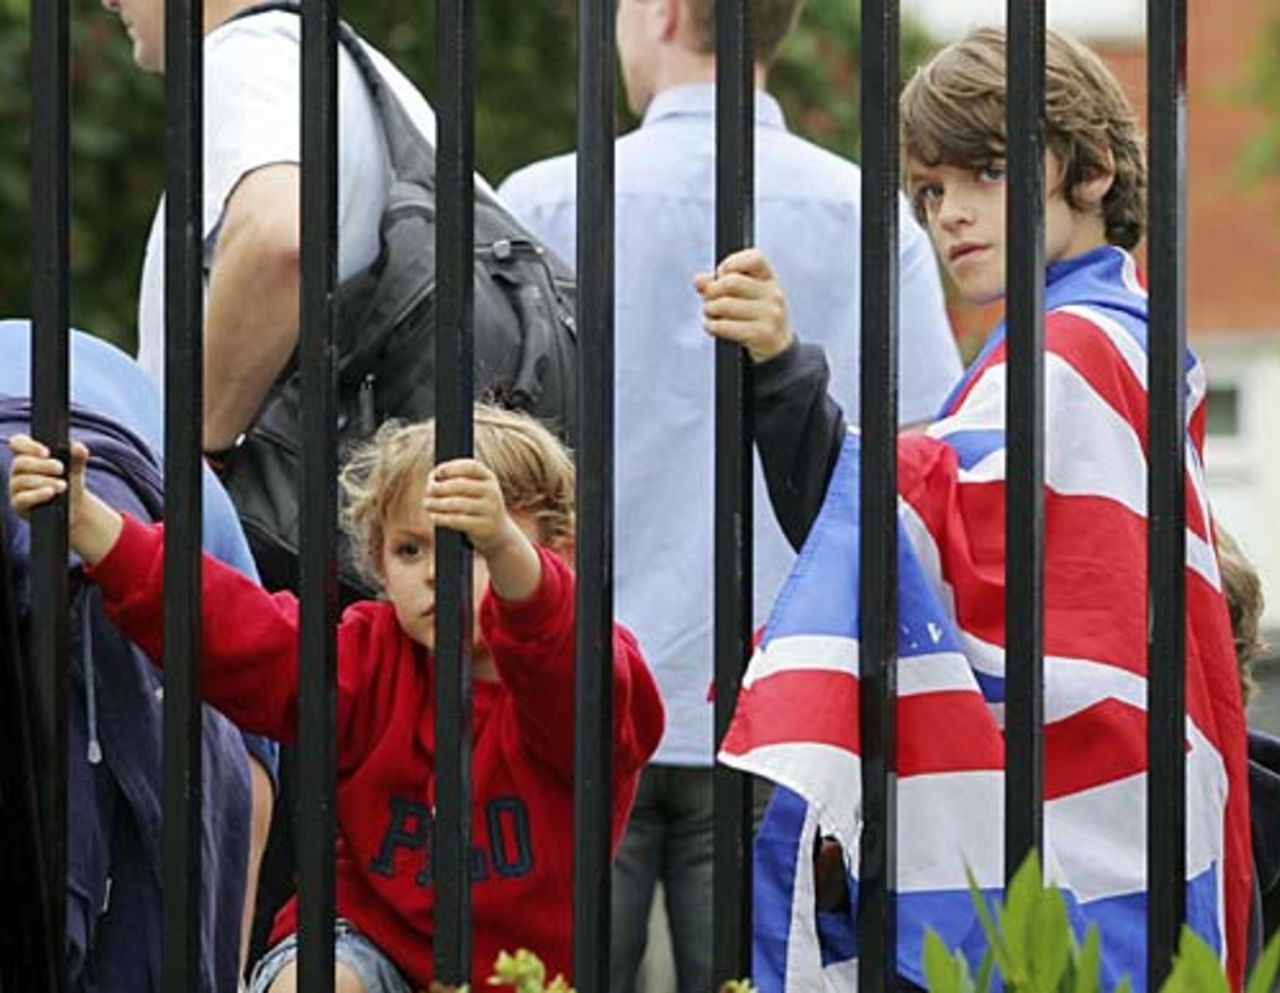 Young fans wait patiently to get into Old Trafford, England v Australia, 3rd Test, Old Trafford, August 15, 2005